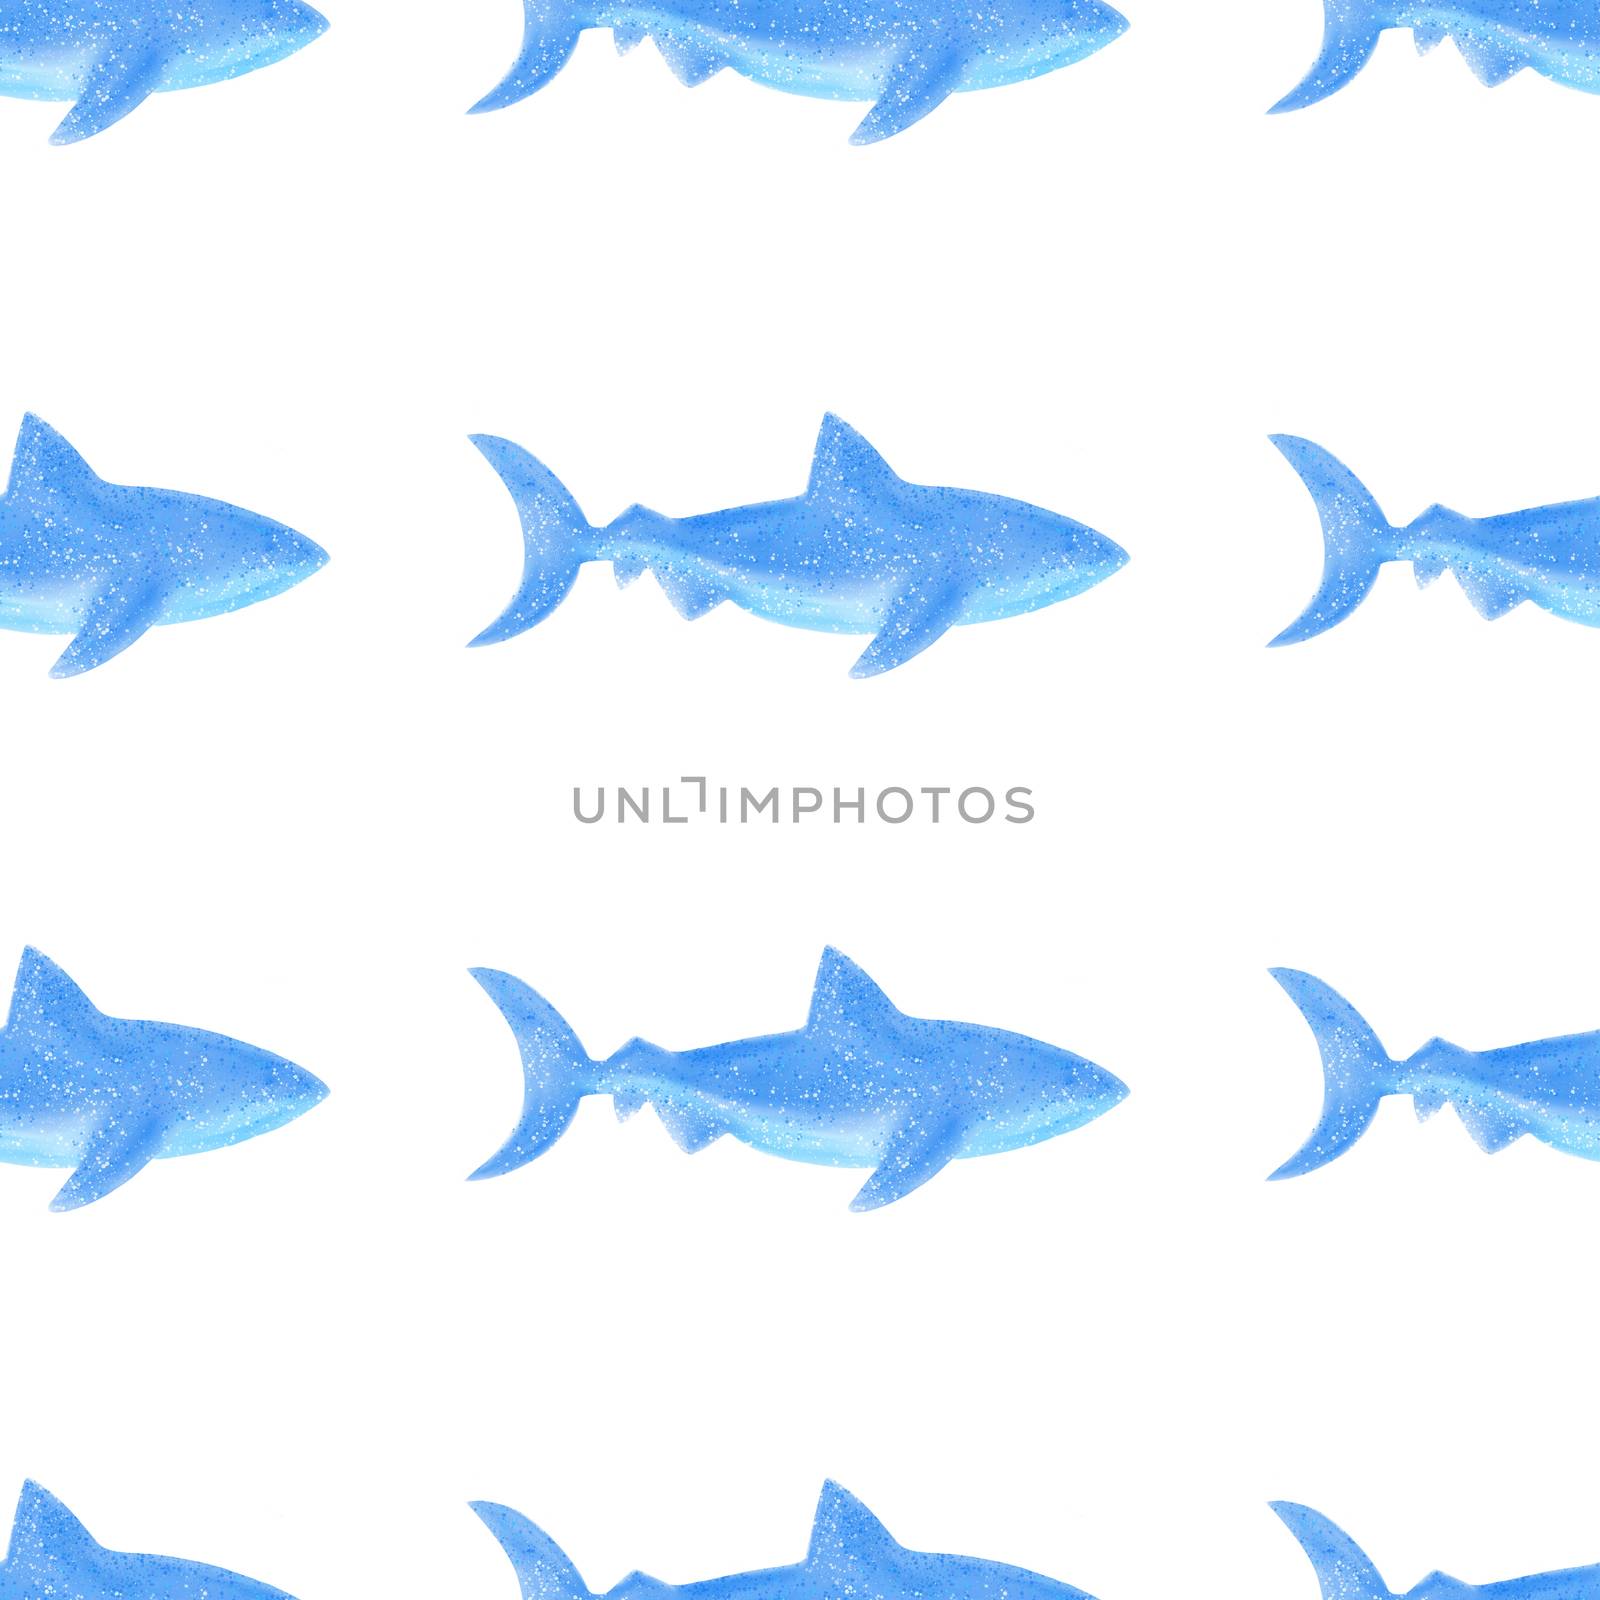 Blue sharks seamless pattern. Digital illustration. Can be used wrapping paper, fabric, wallpaper. Stock image.